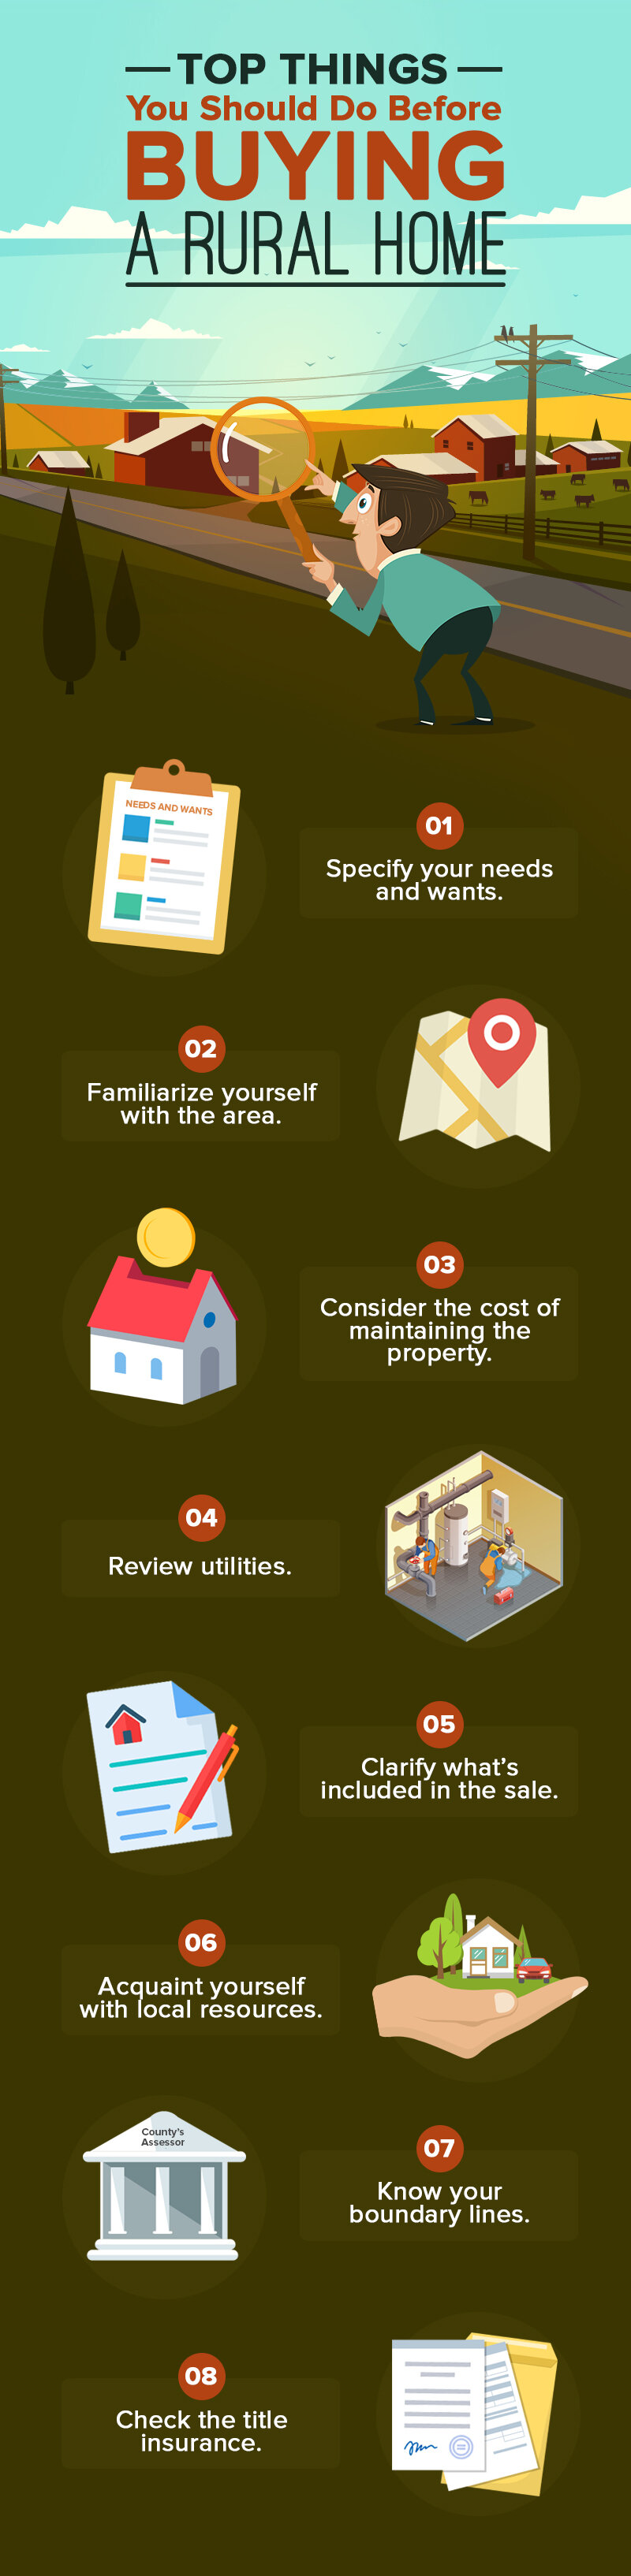 Top Things You Should Do Before Buying A Rural Home